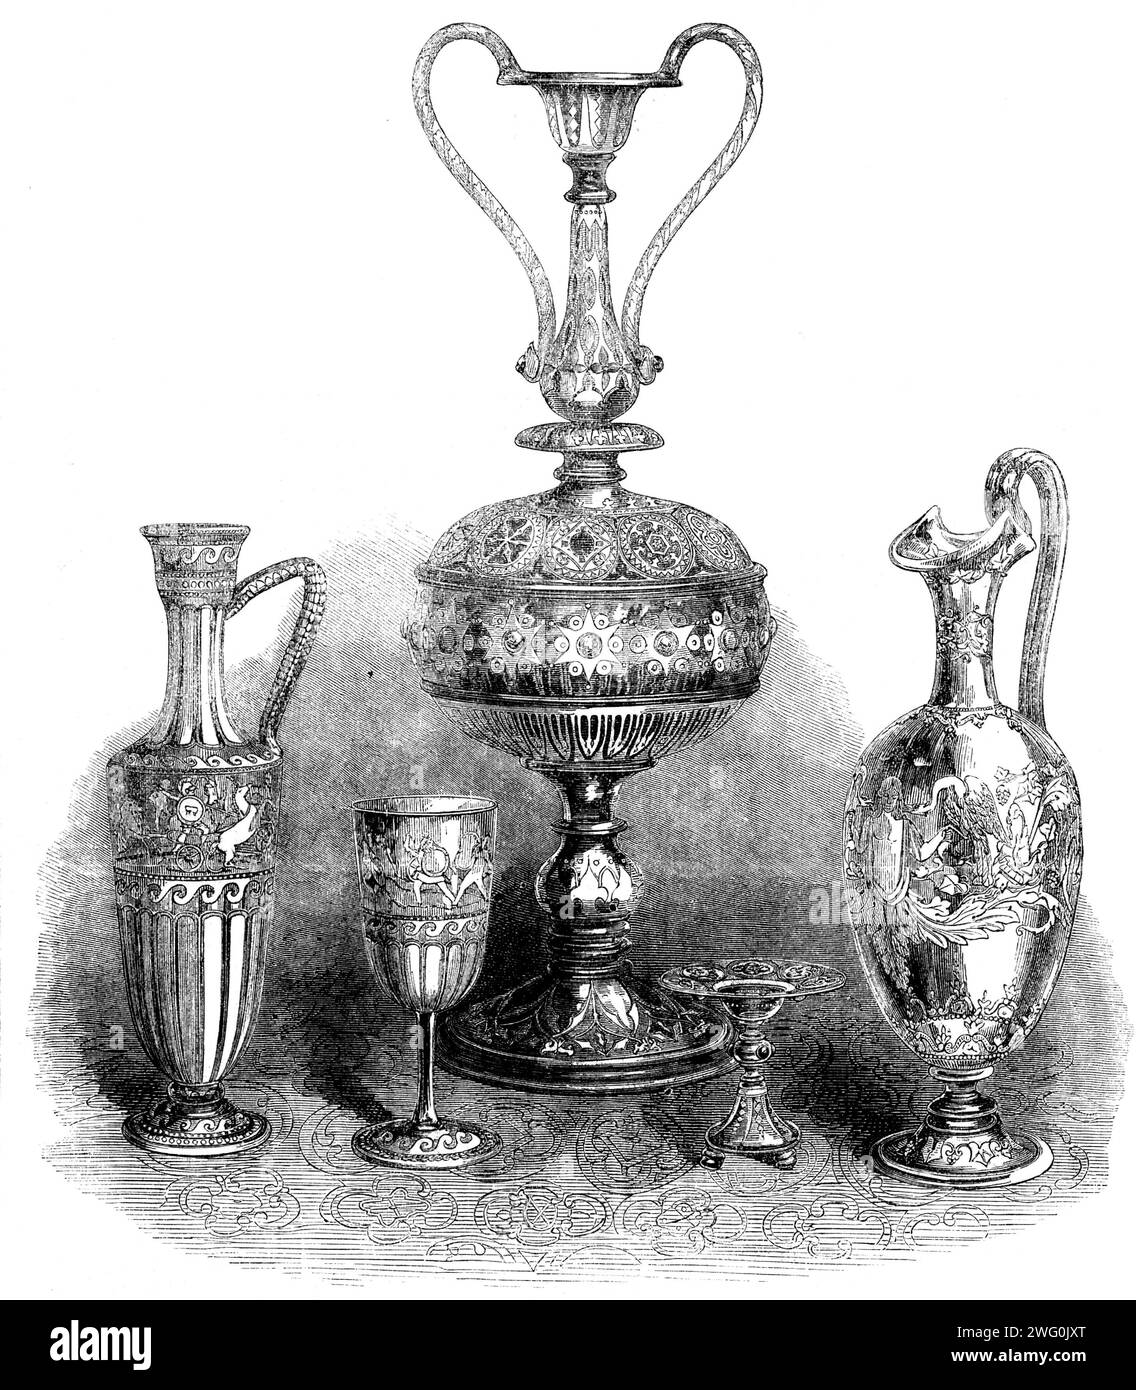 The International Exhibition: group of glass, by Messrs. Phillips, of Oxford-street and Bond-street, 1862. 'The shape [of the central vase], while novel, is good, the division into primary parts and the relation of the parts to each other, being well managed. The enrichment is skilfully composed and is beautiful in its parts, and the jewelling is well managed...The ornament applied to this vase is of a Gothic character, and is in tolerably good keeping throughout. The vase to the right is of a fine classic form, and has a somewhat Roman character. The engraving is very fine, hut the ornament i Stock Photo